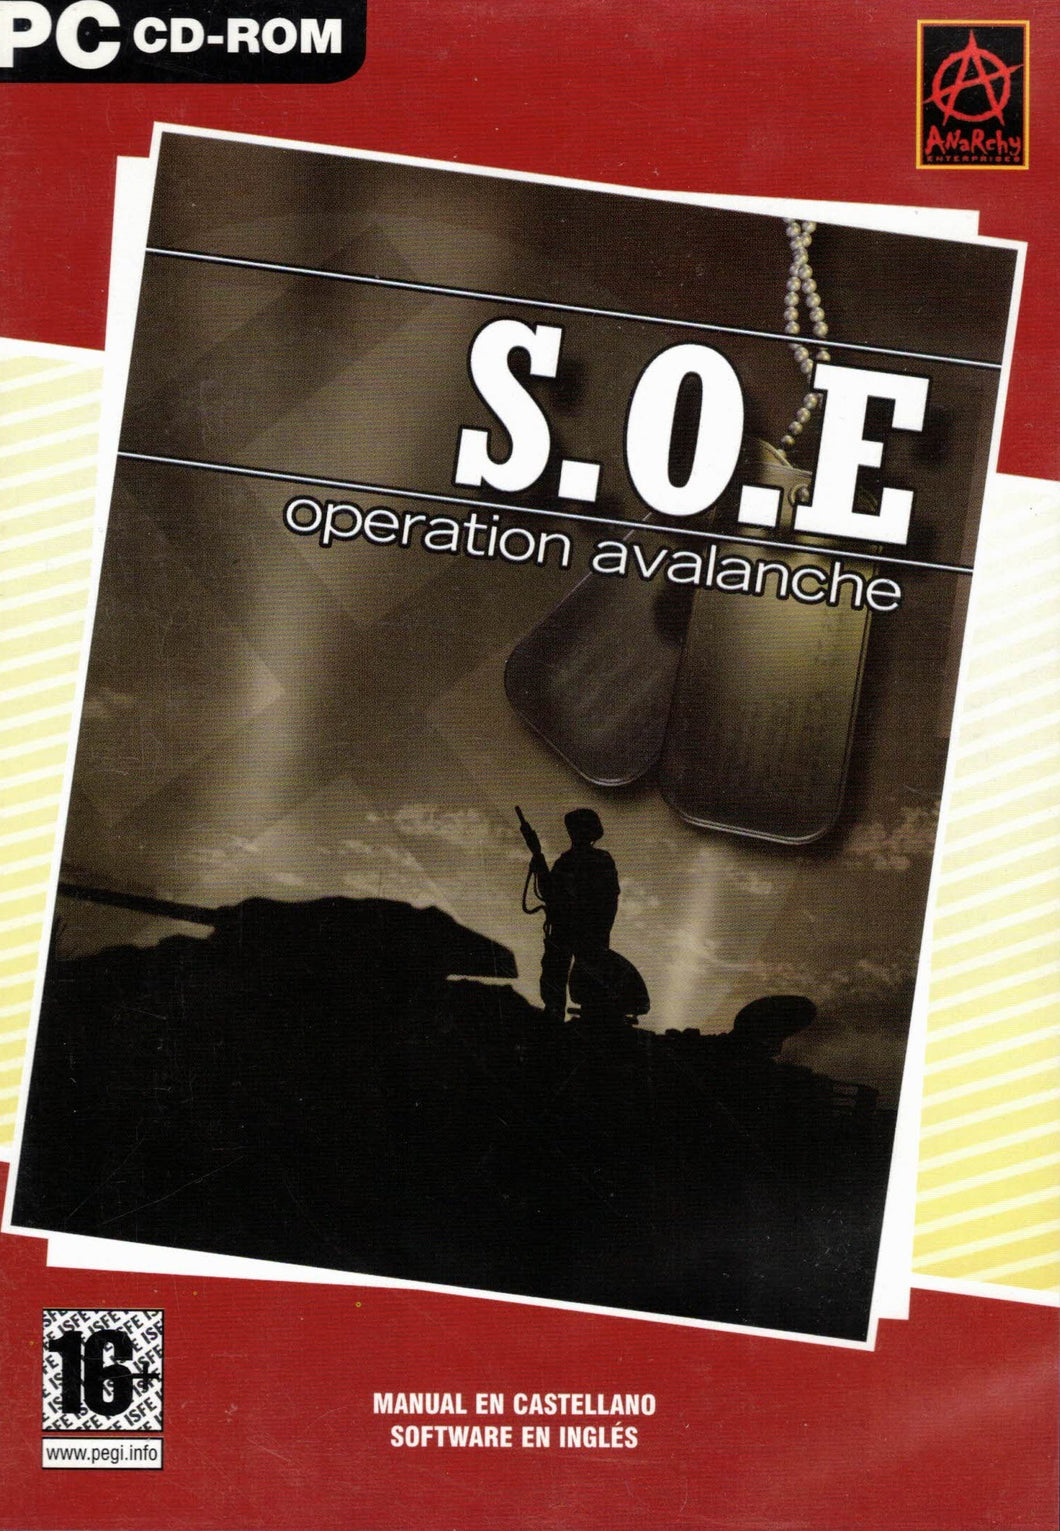 SOE Operation Avalanche (PC CD-ROM) C-202 (very good second hand)